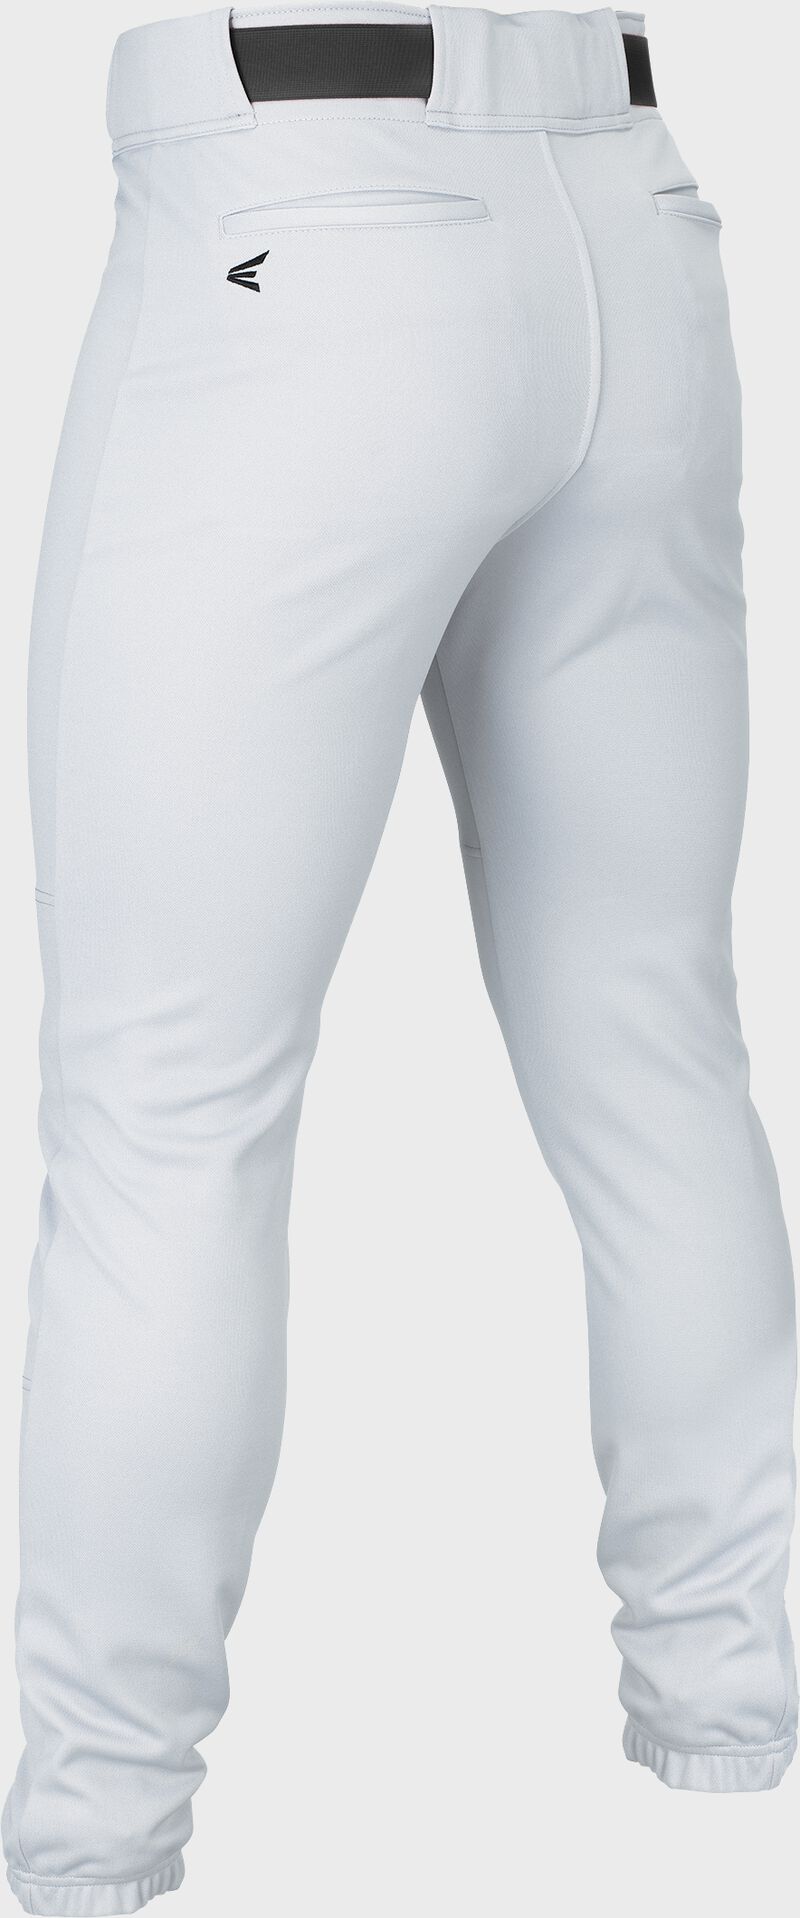 Rival+ Pro Taper Pant Youth WHITE XL